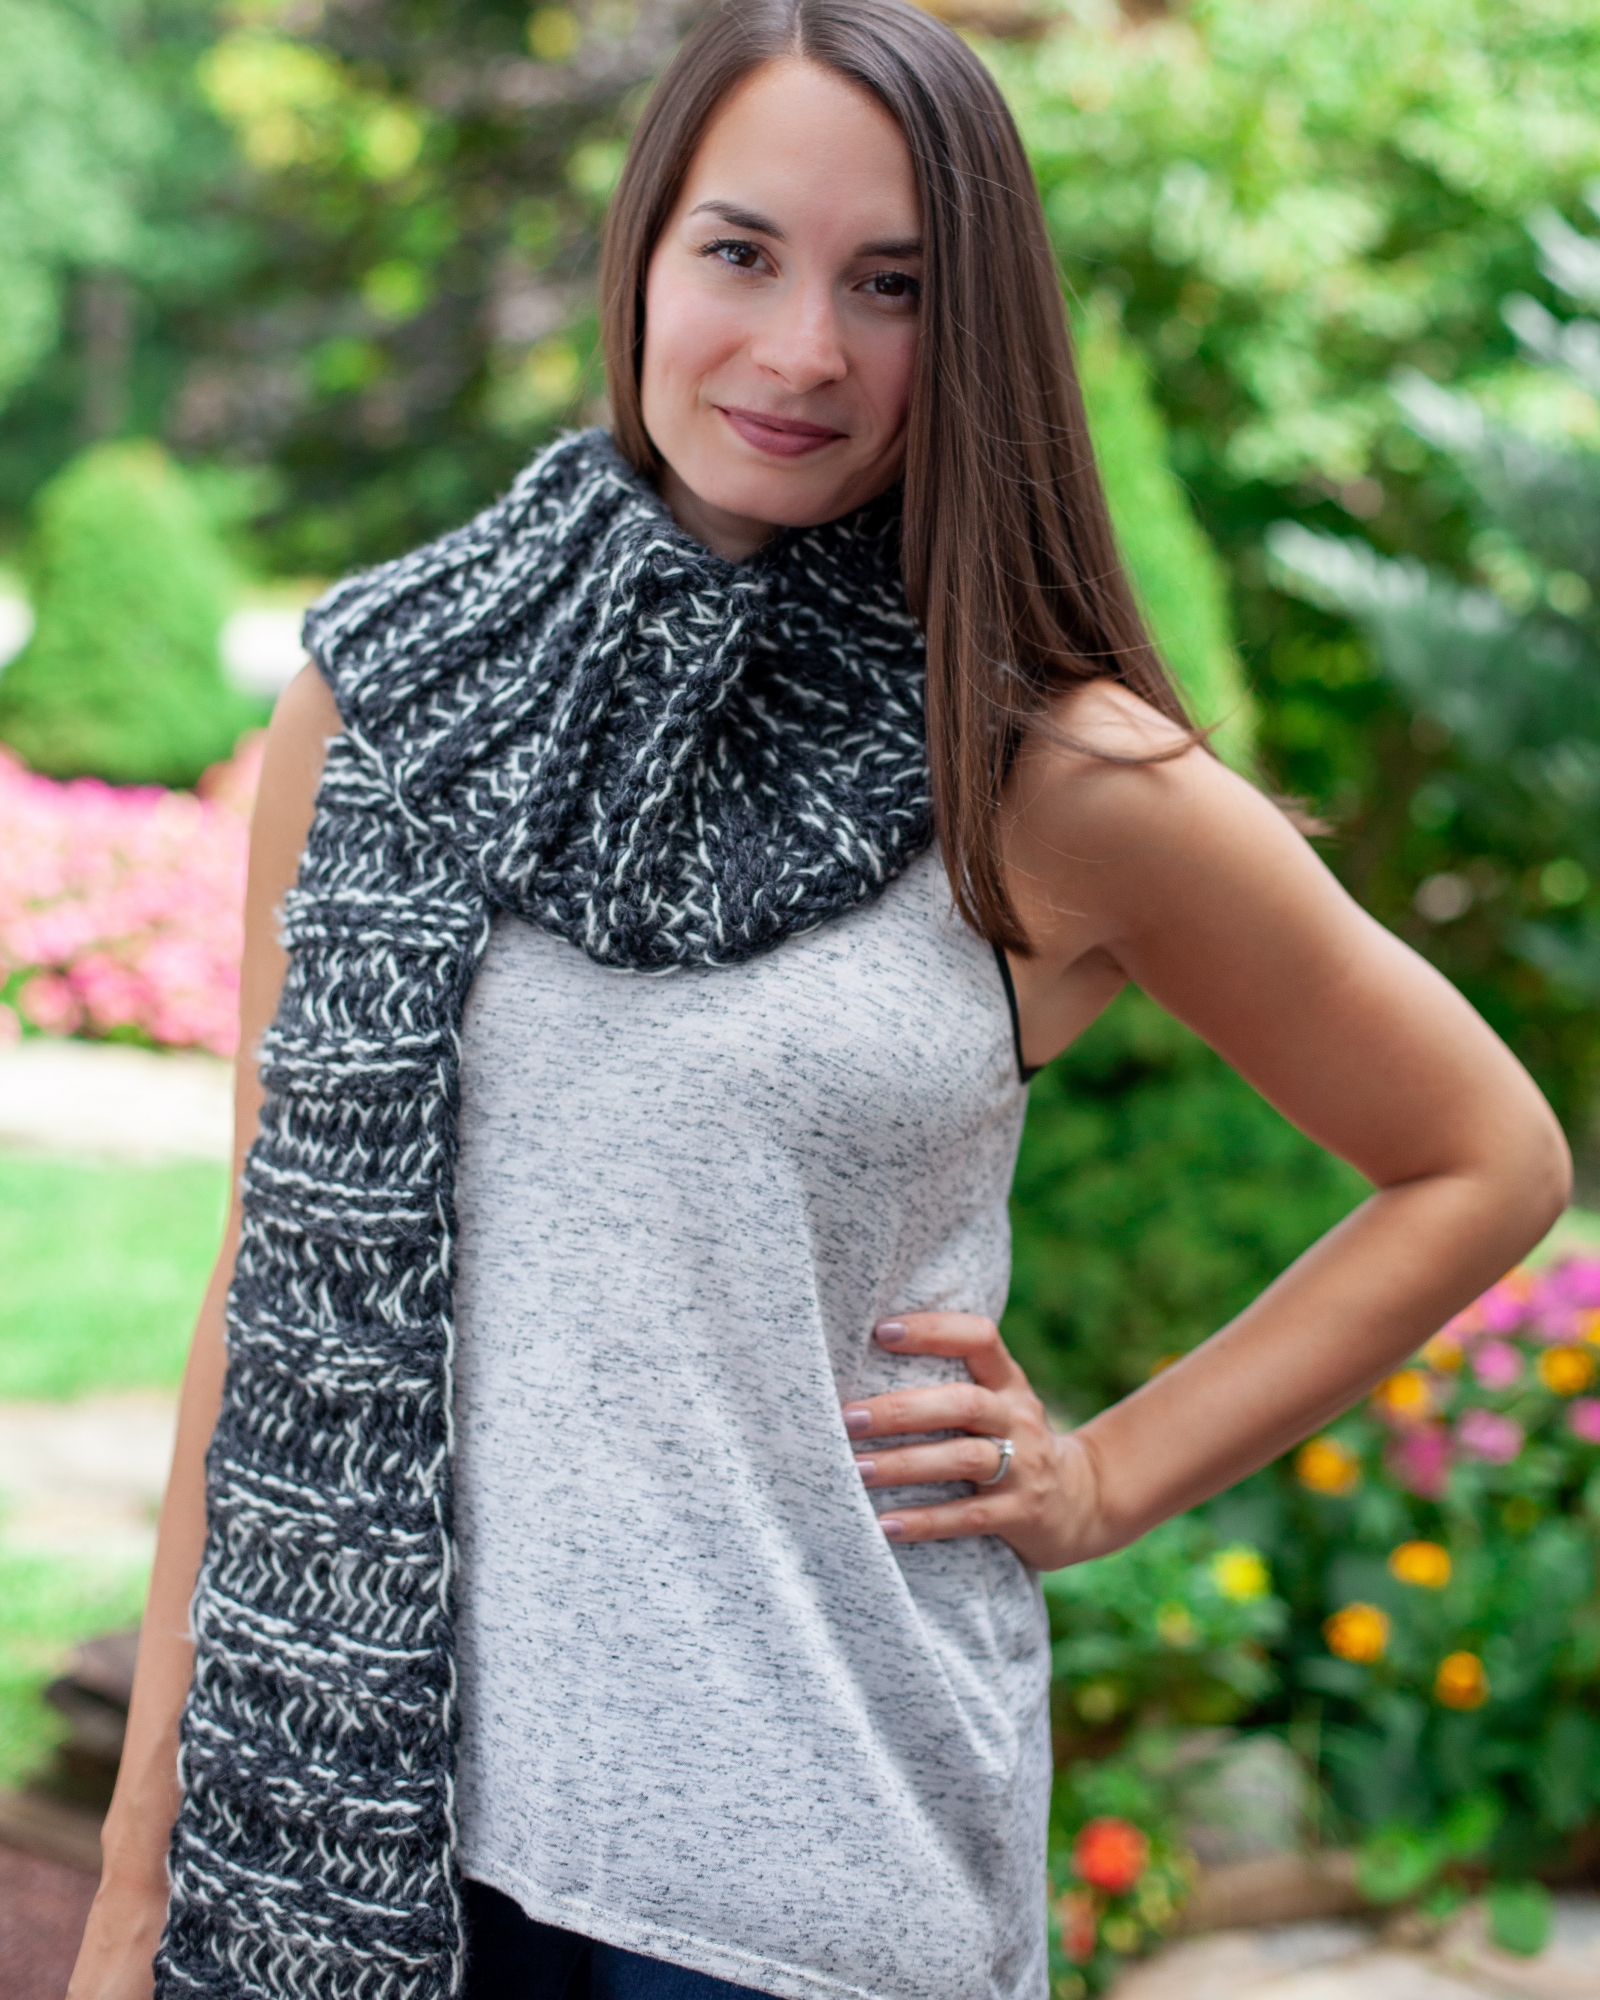 Loom knit, chunky, extra warm, black and white, trendy scarf.